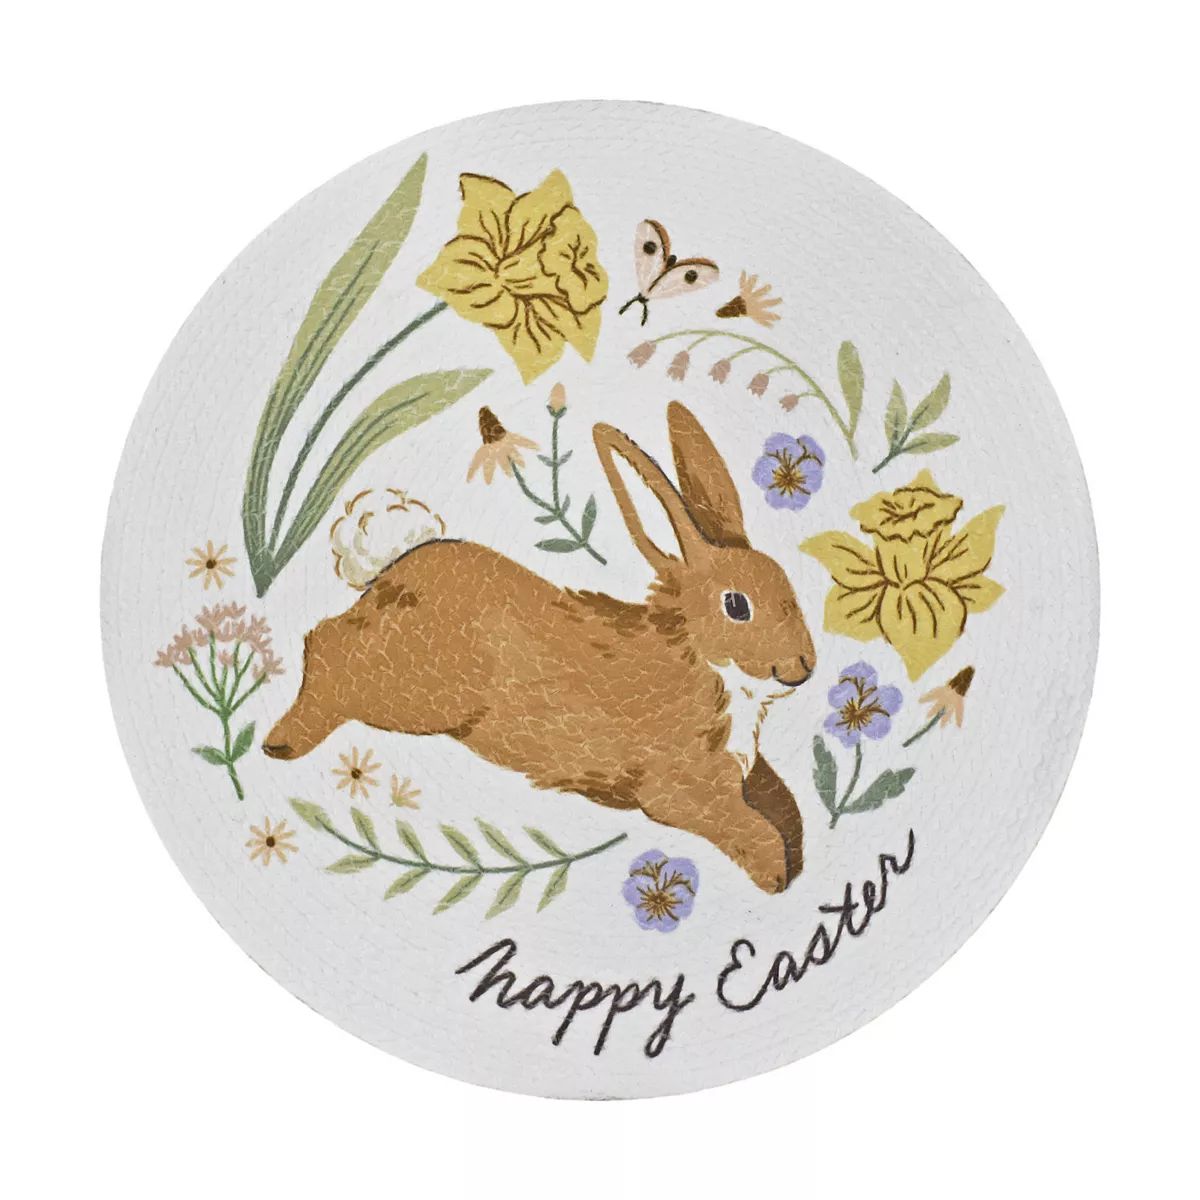 Celebrate Together™ Easter Happy Easter Braided Placemat | Kohl's